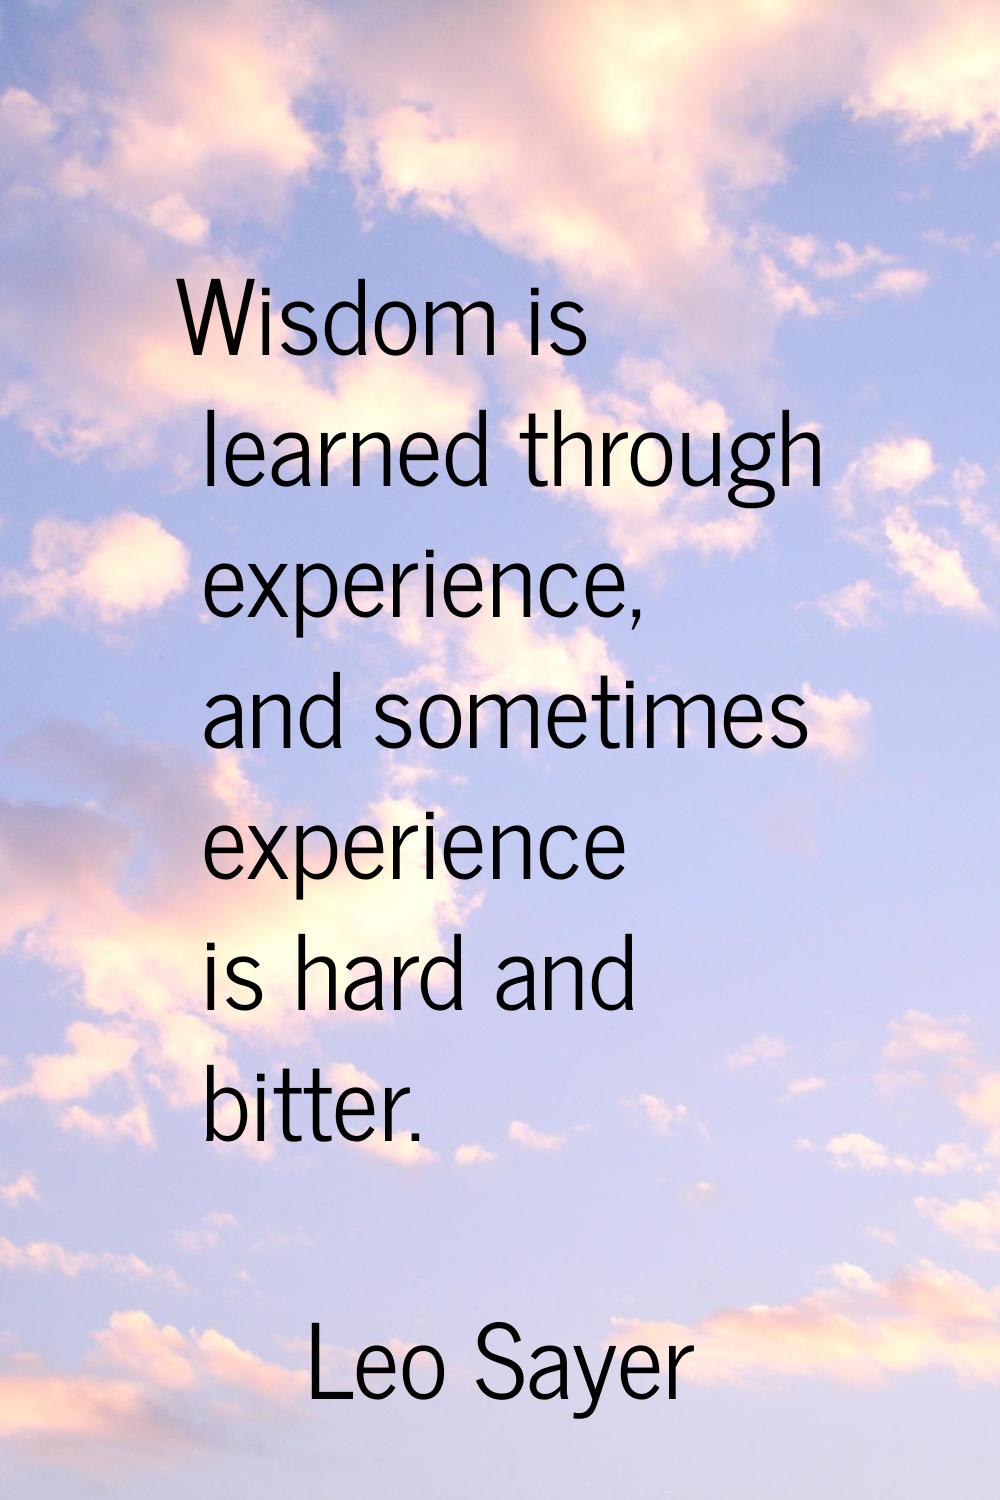 Wisdom is learned through experience, and sometimes experience is hard and bitter.